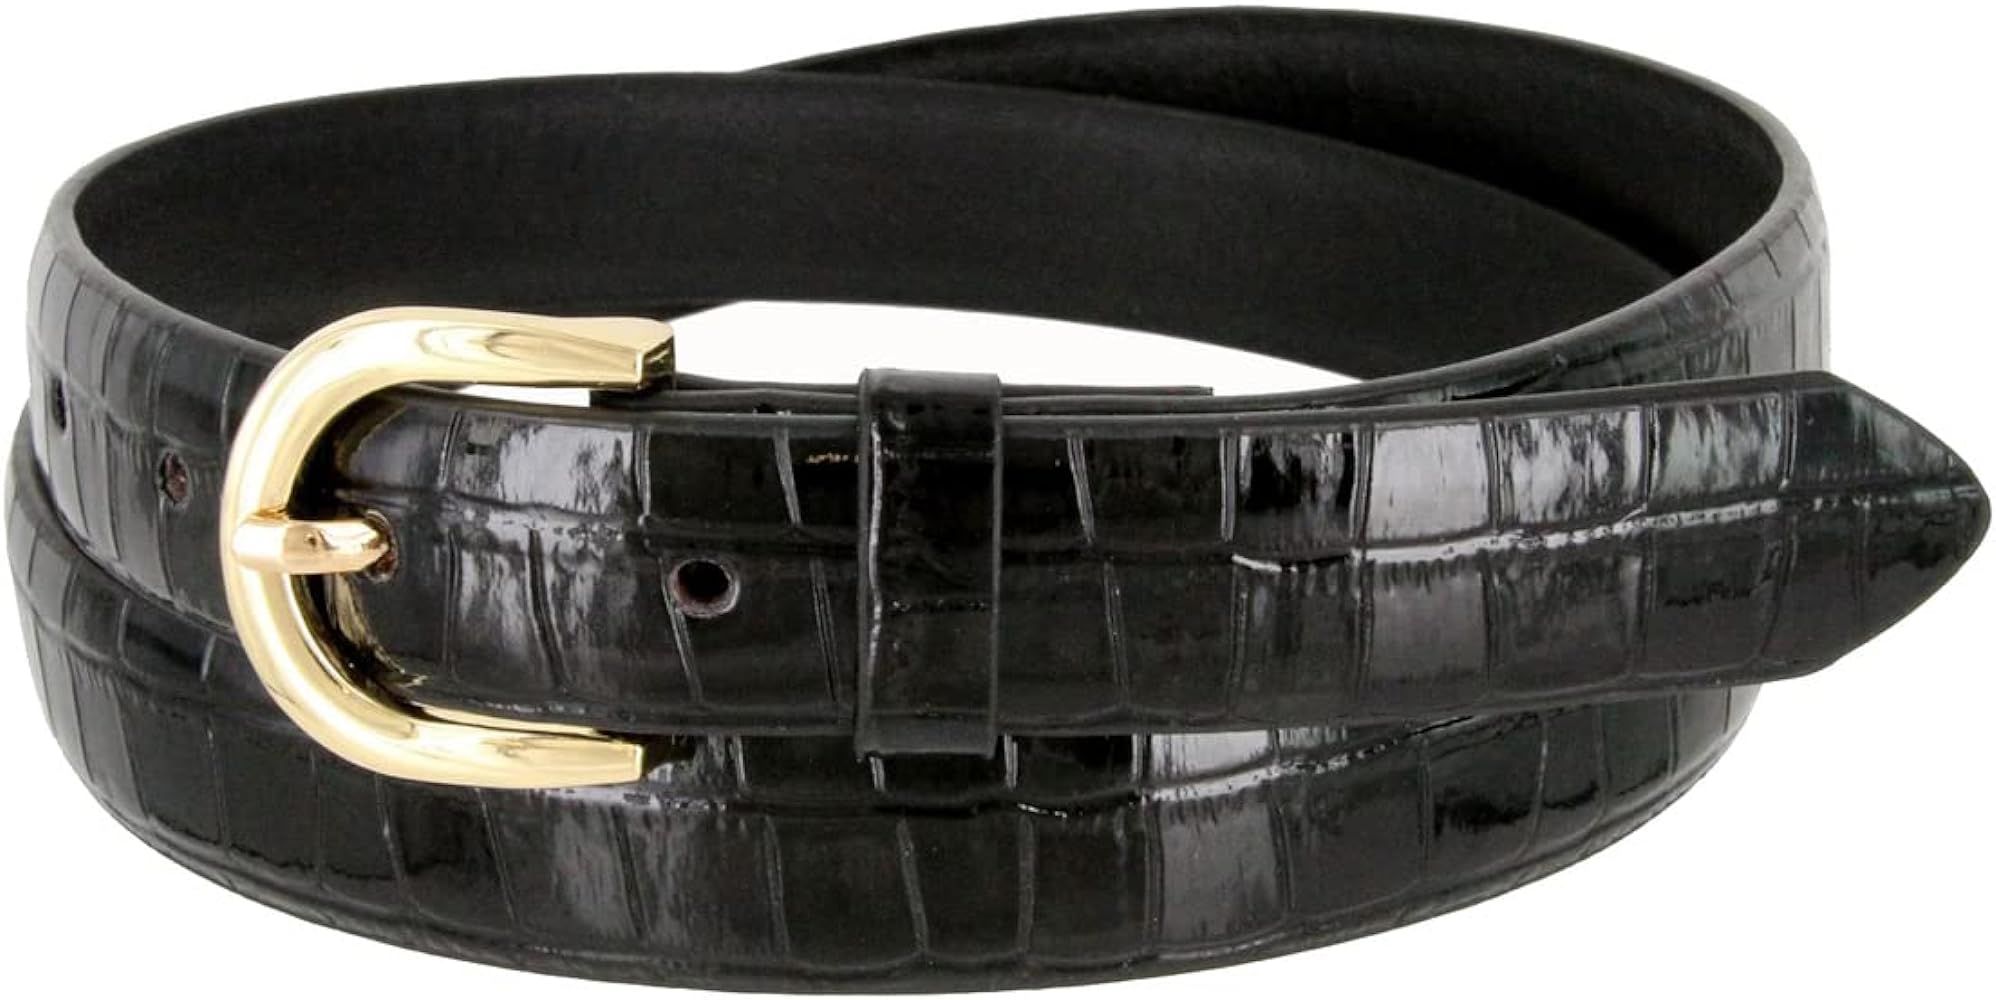 Women's Casual Fashion Skinny Belt       
Material: Leather | Amazon (US)